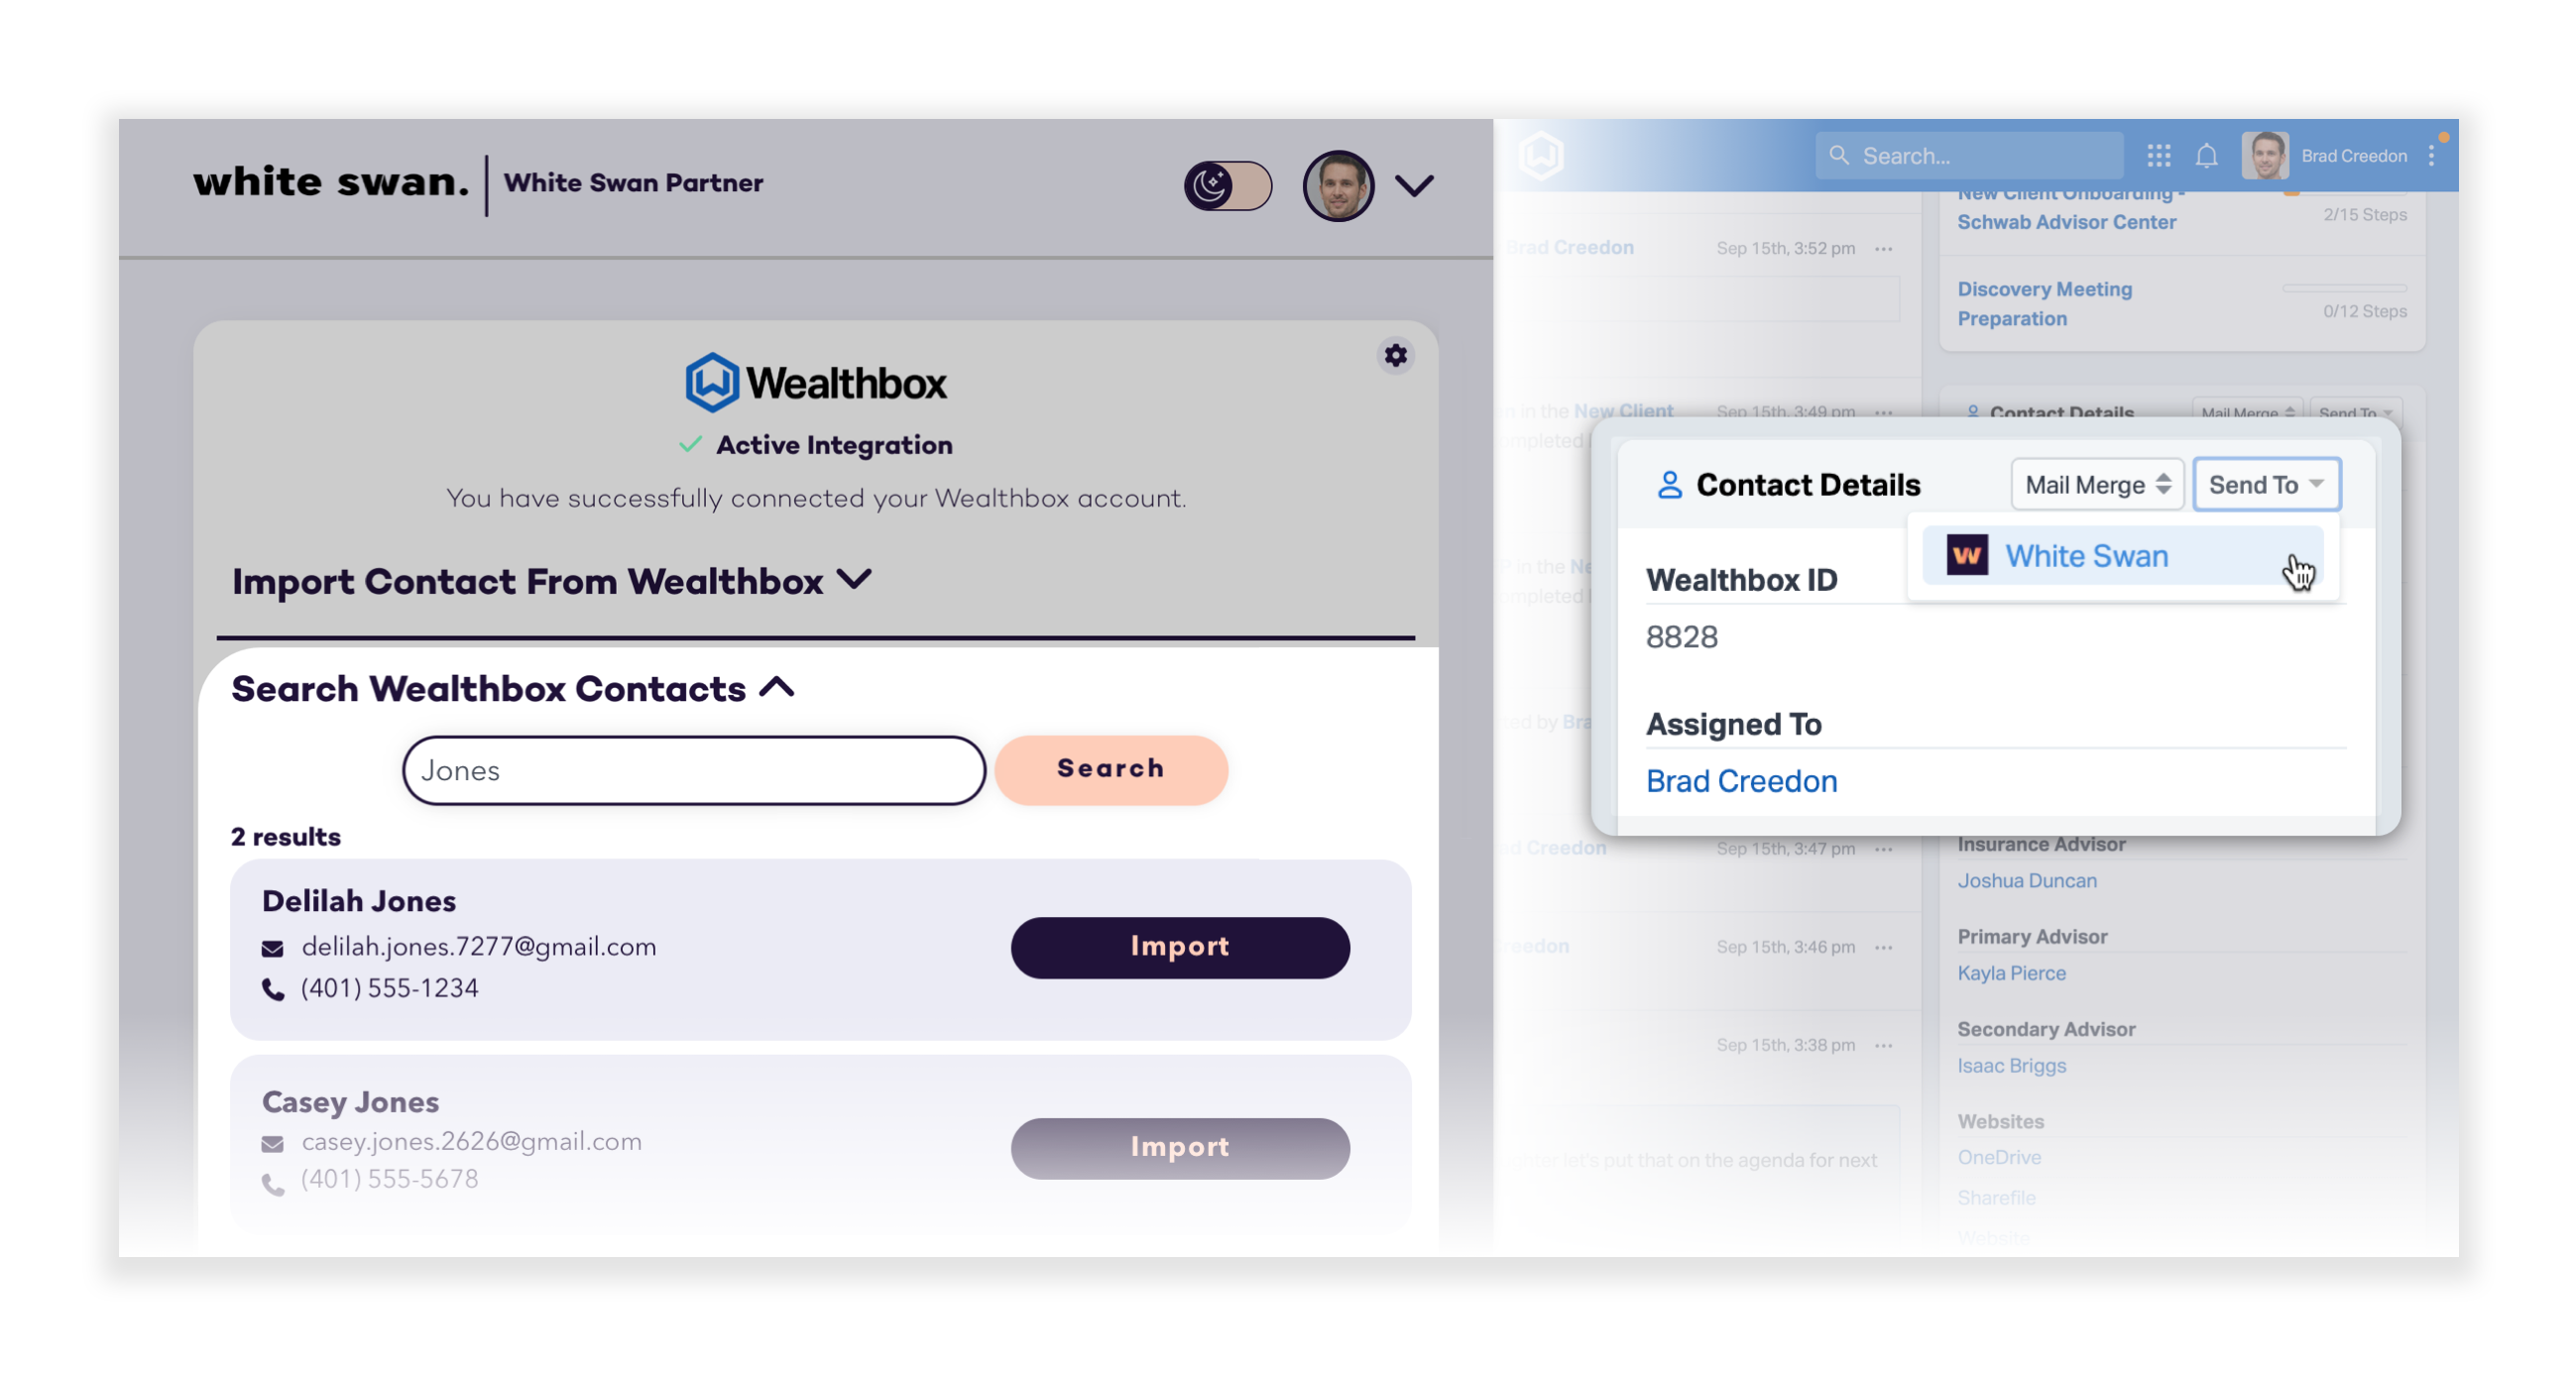 You can send a contact from Wealthbox directly to your White Swan account. Imported contact information is used to start plan requests and pre-fill client applications.